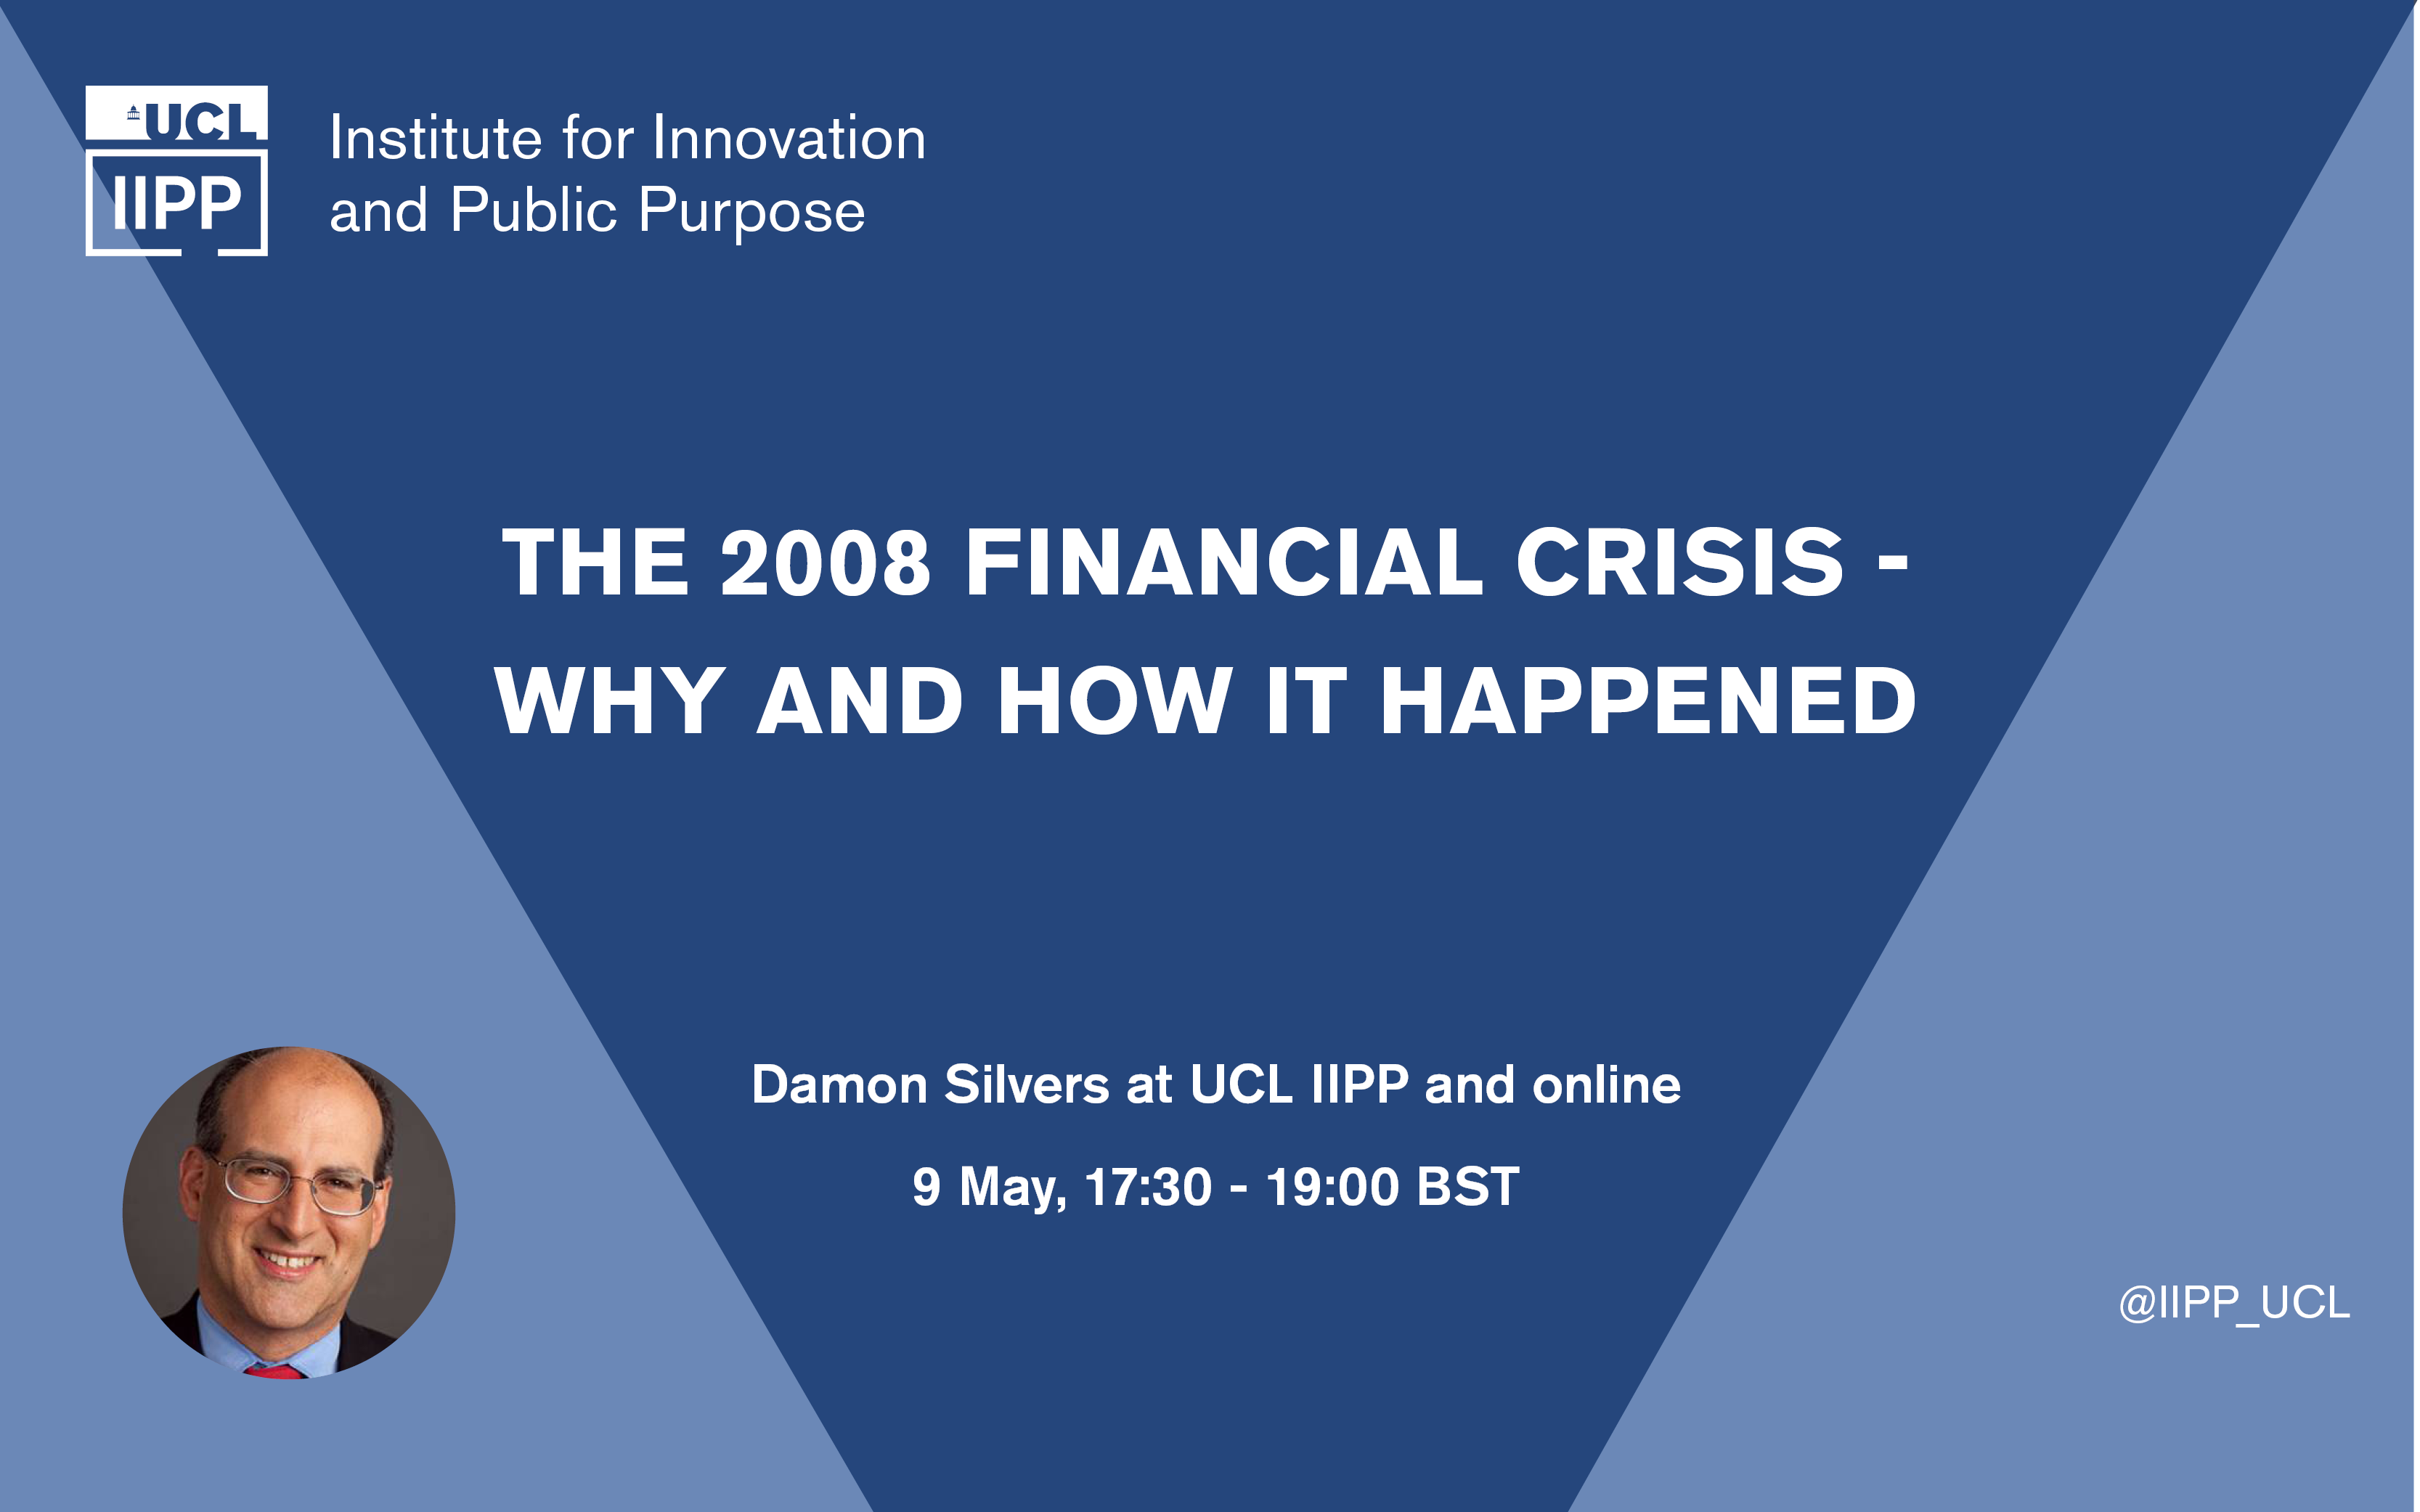  The 2008 Financial Crisis--Why and How it Happened with Damon Silvers at UCL IIPP